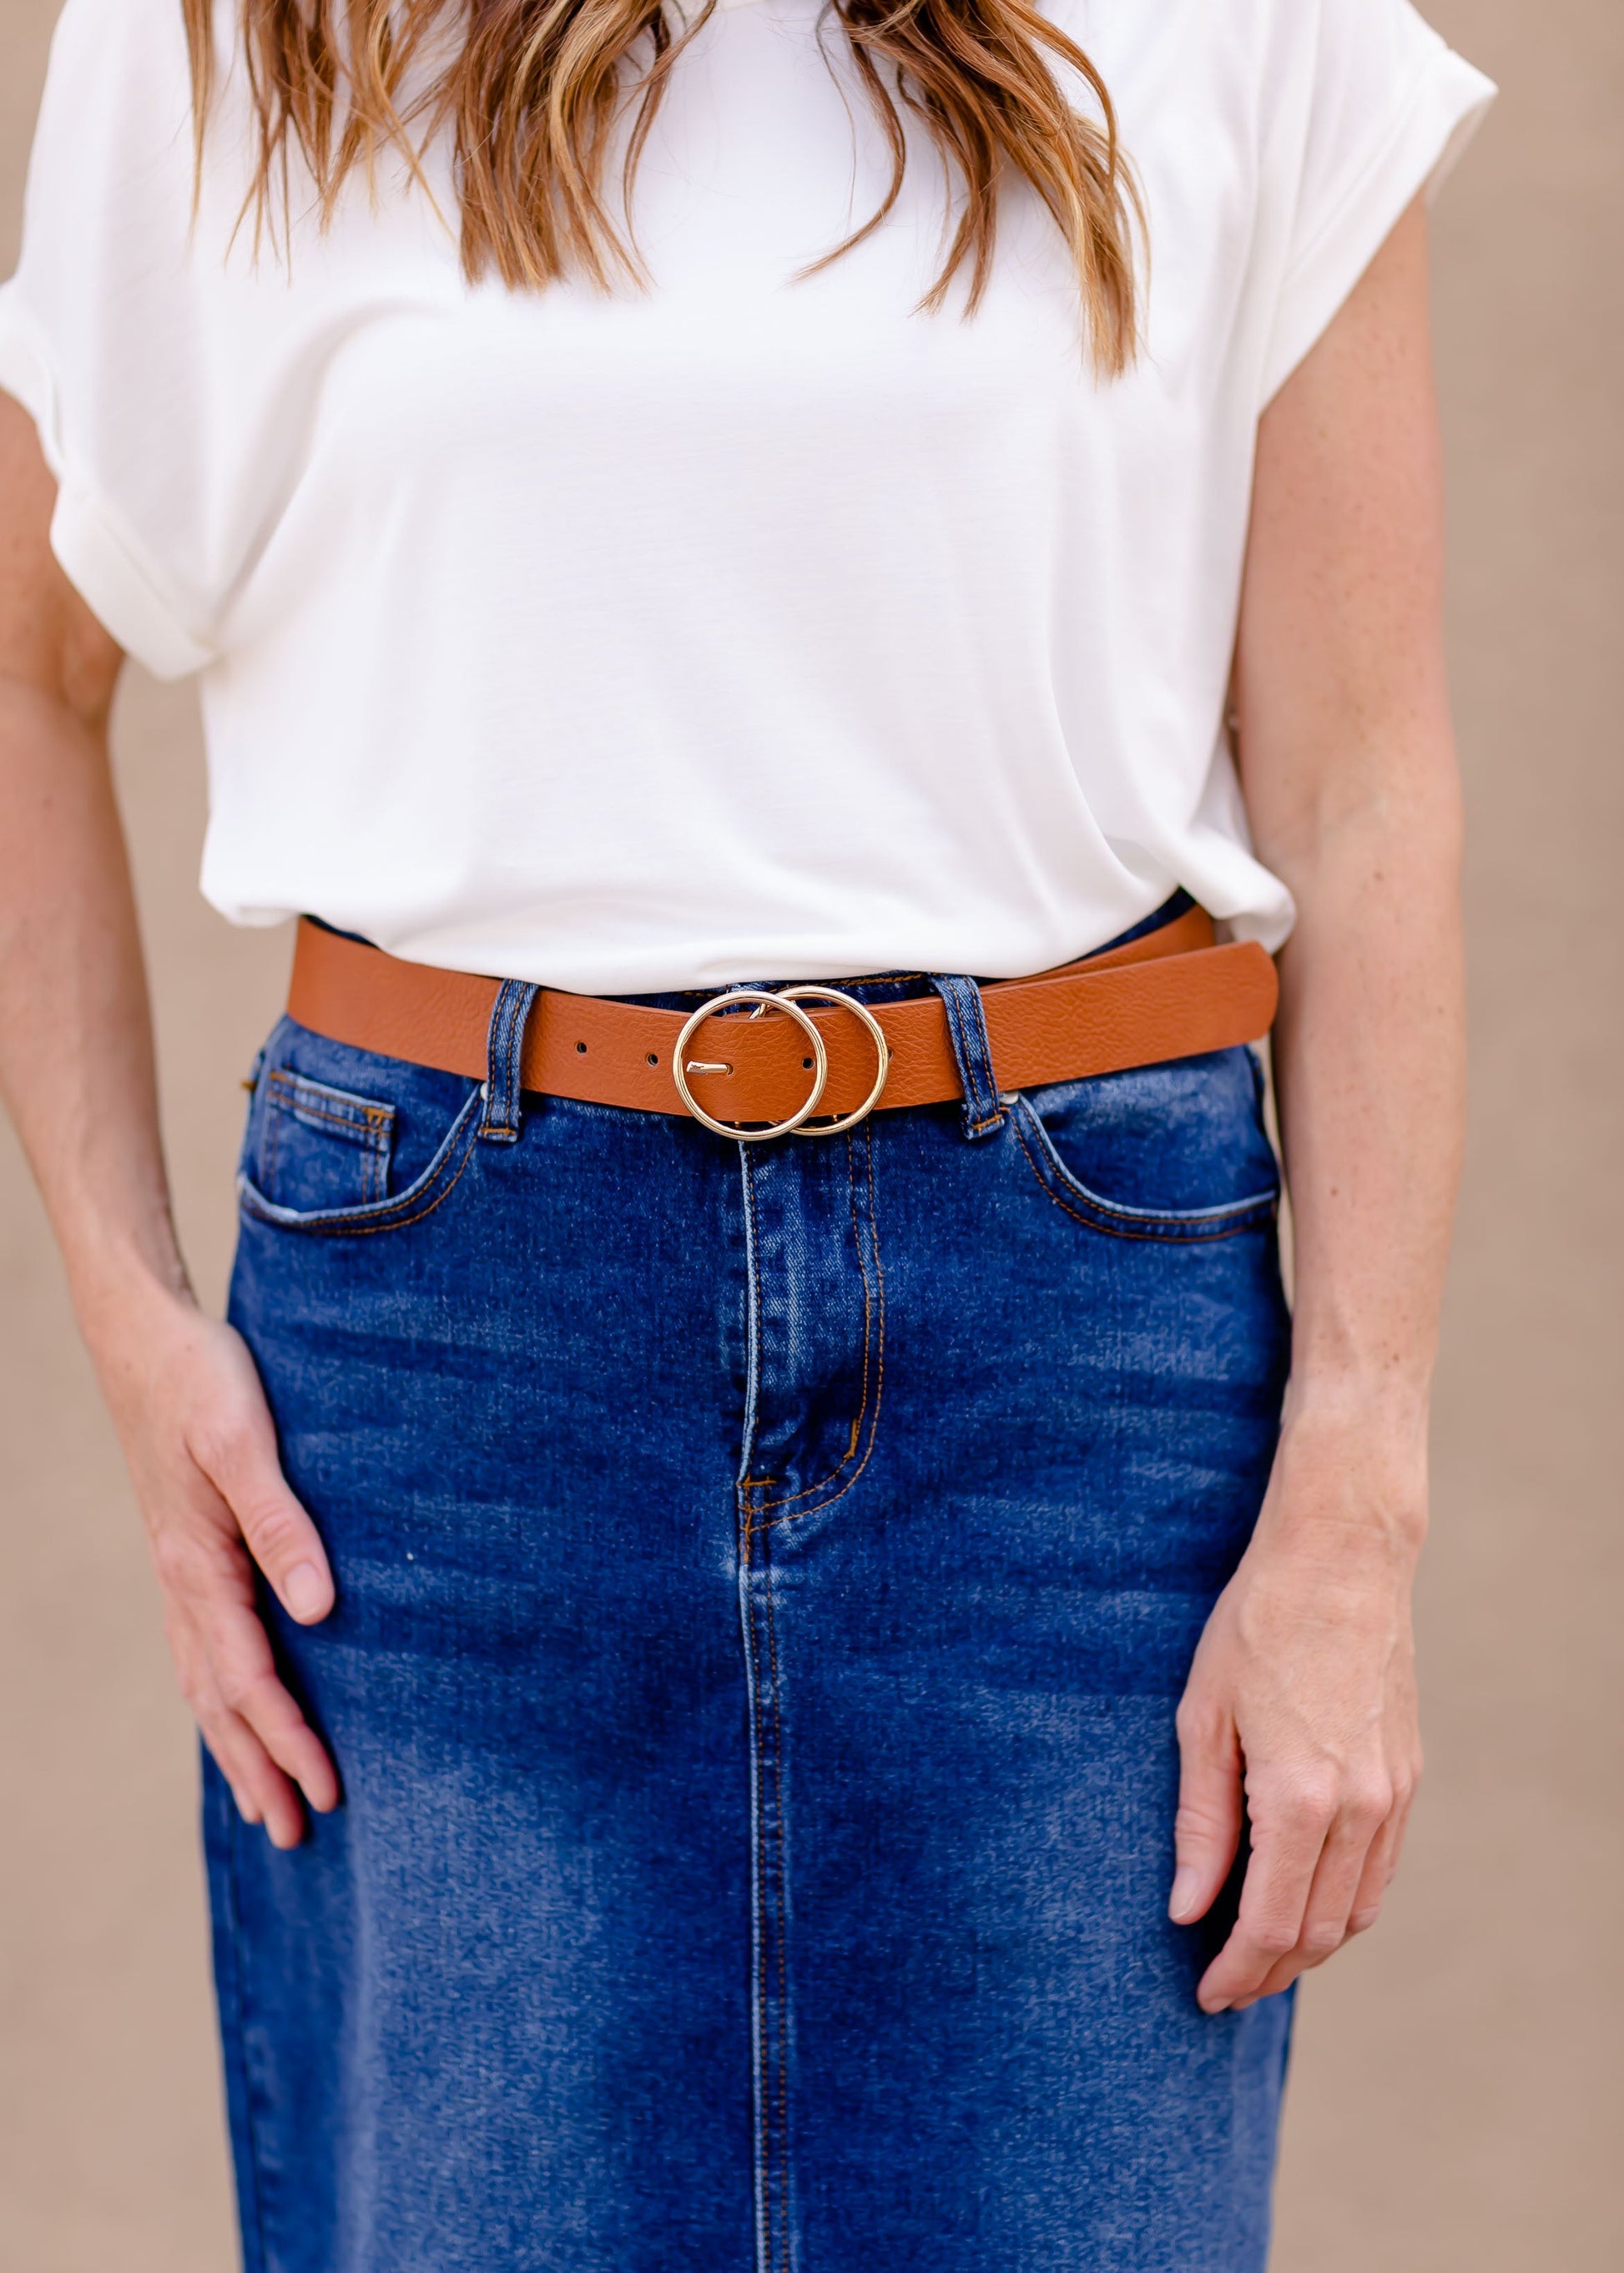 Double Ring Buckle Belt Accessories Tan